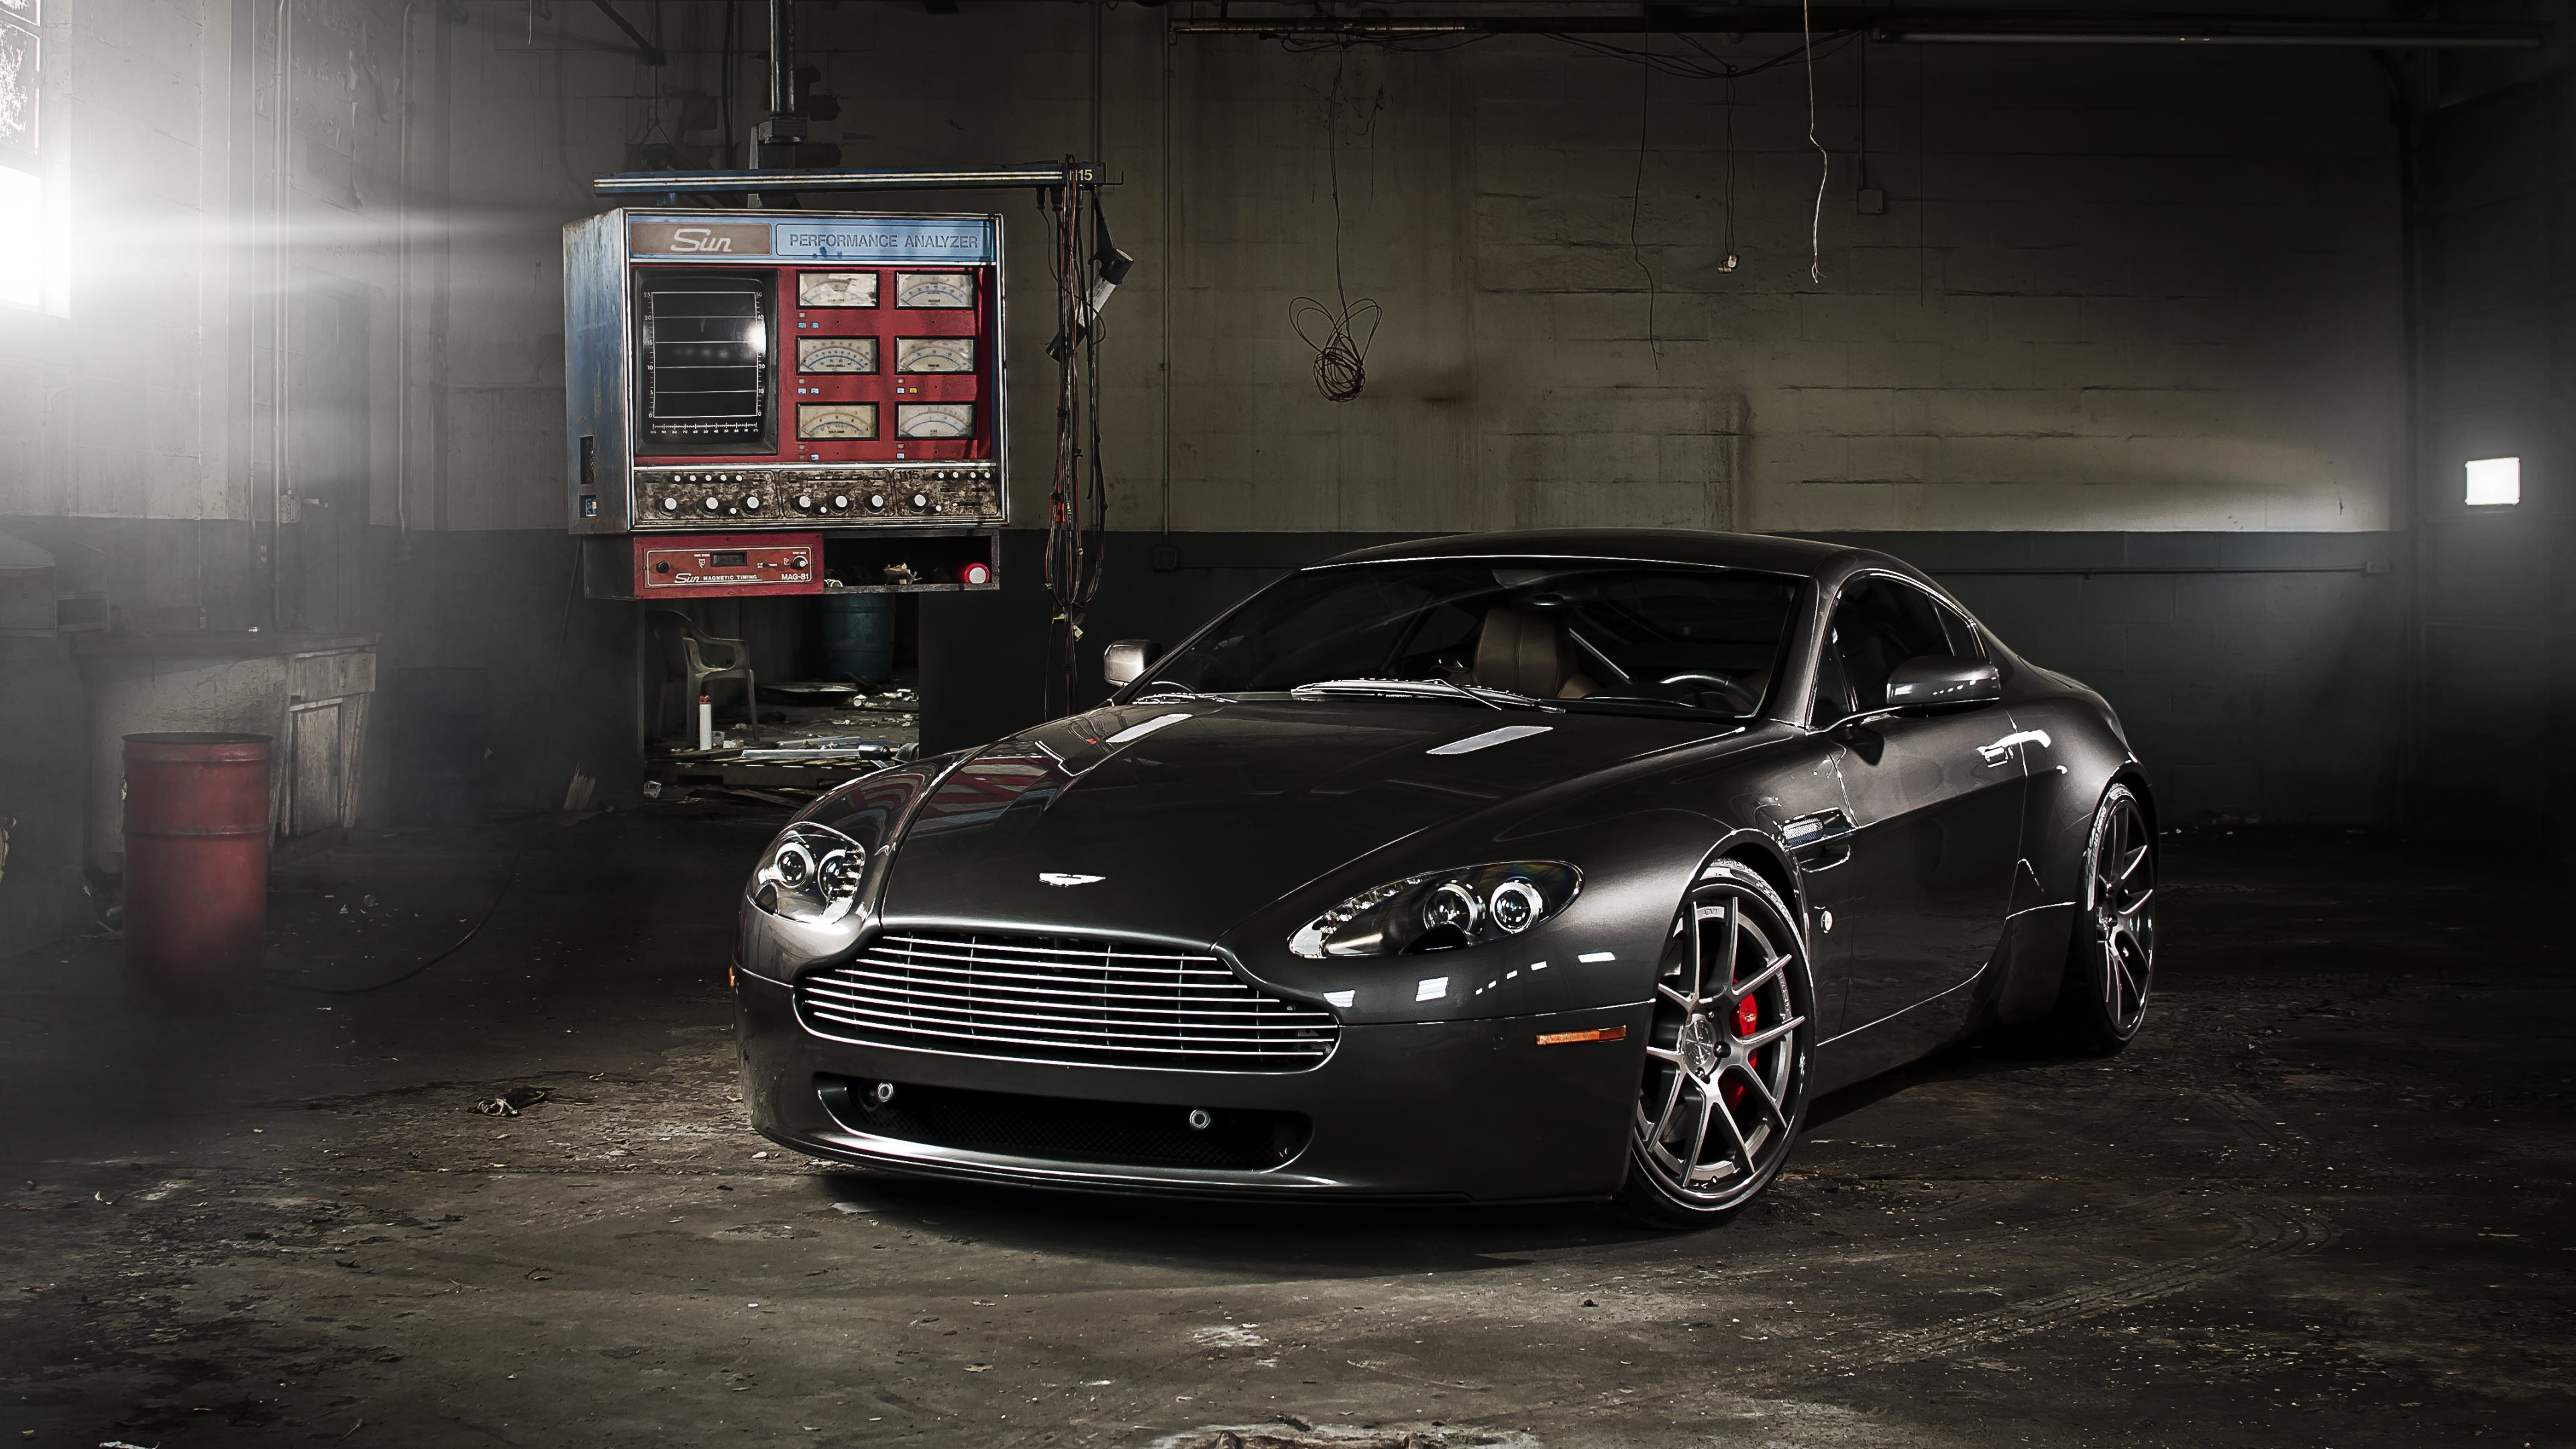 3840x2160 The 2nd HD wallpaper with Aston Martin